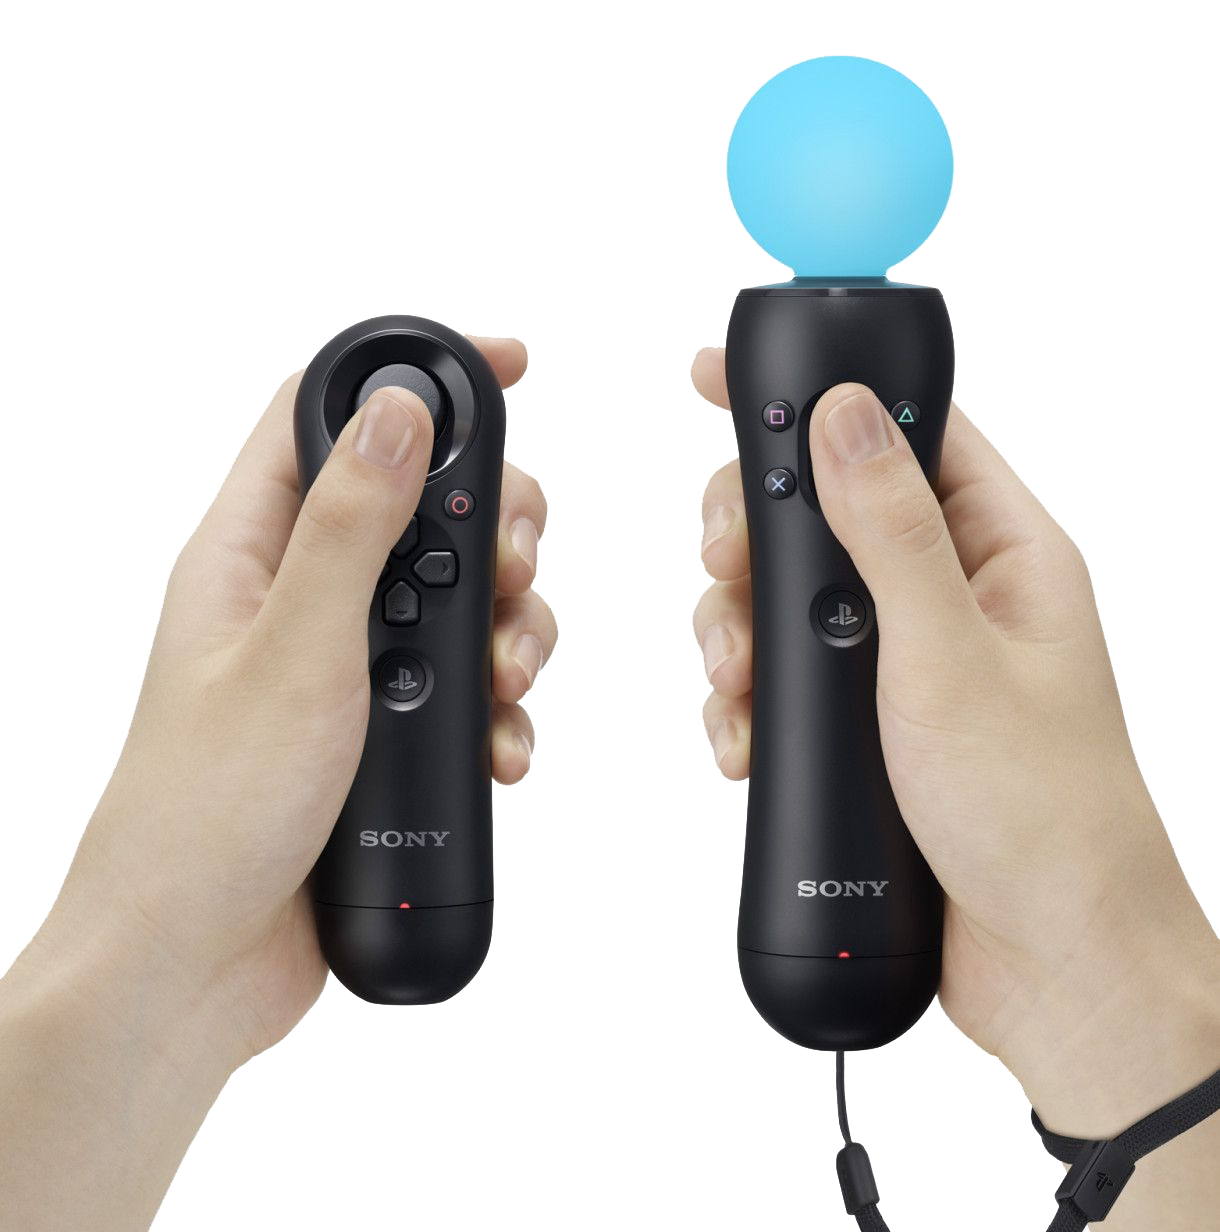 Sony ps4 move Motion Controller. Sony Motion Controller ps4. Контроллер Sony PLAYSTATION 3 move. Контроллеры PS move от Sony PS. Мув ер